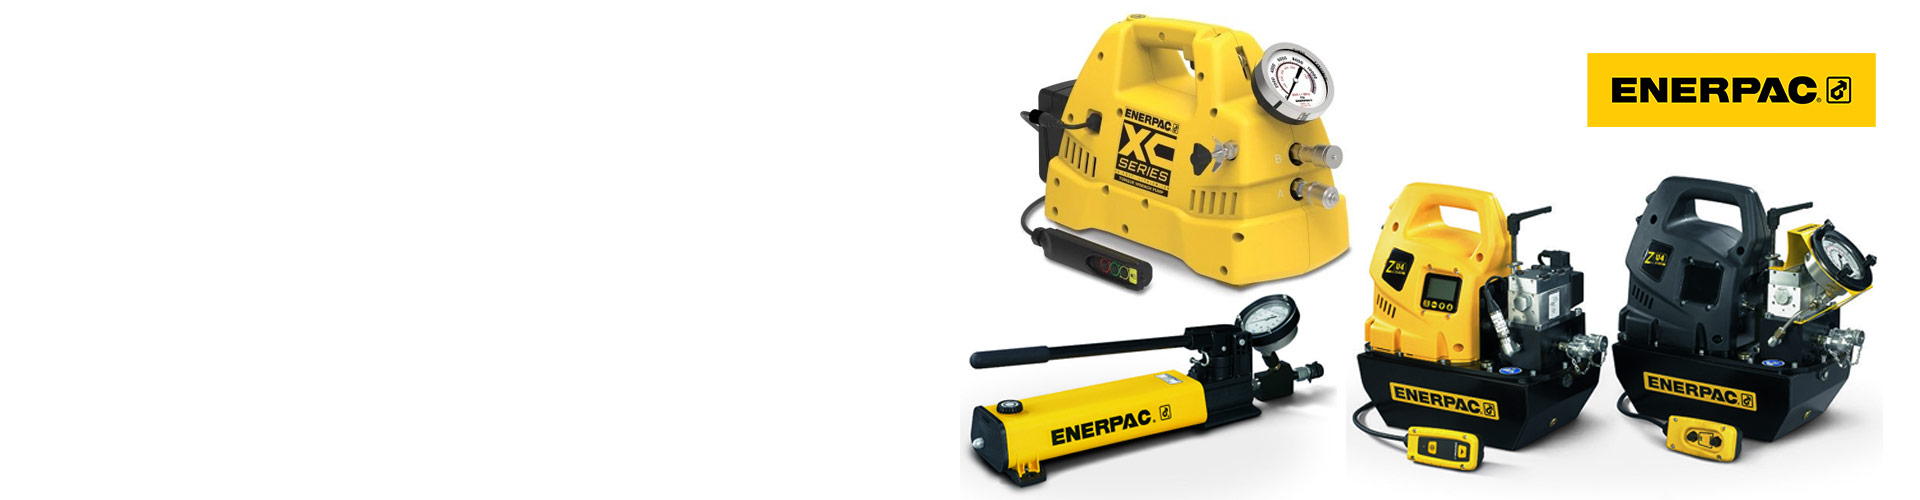 Enerpac Pumps & Power Units in Stock